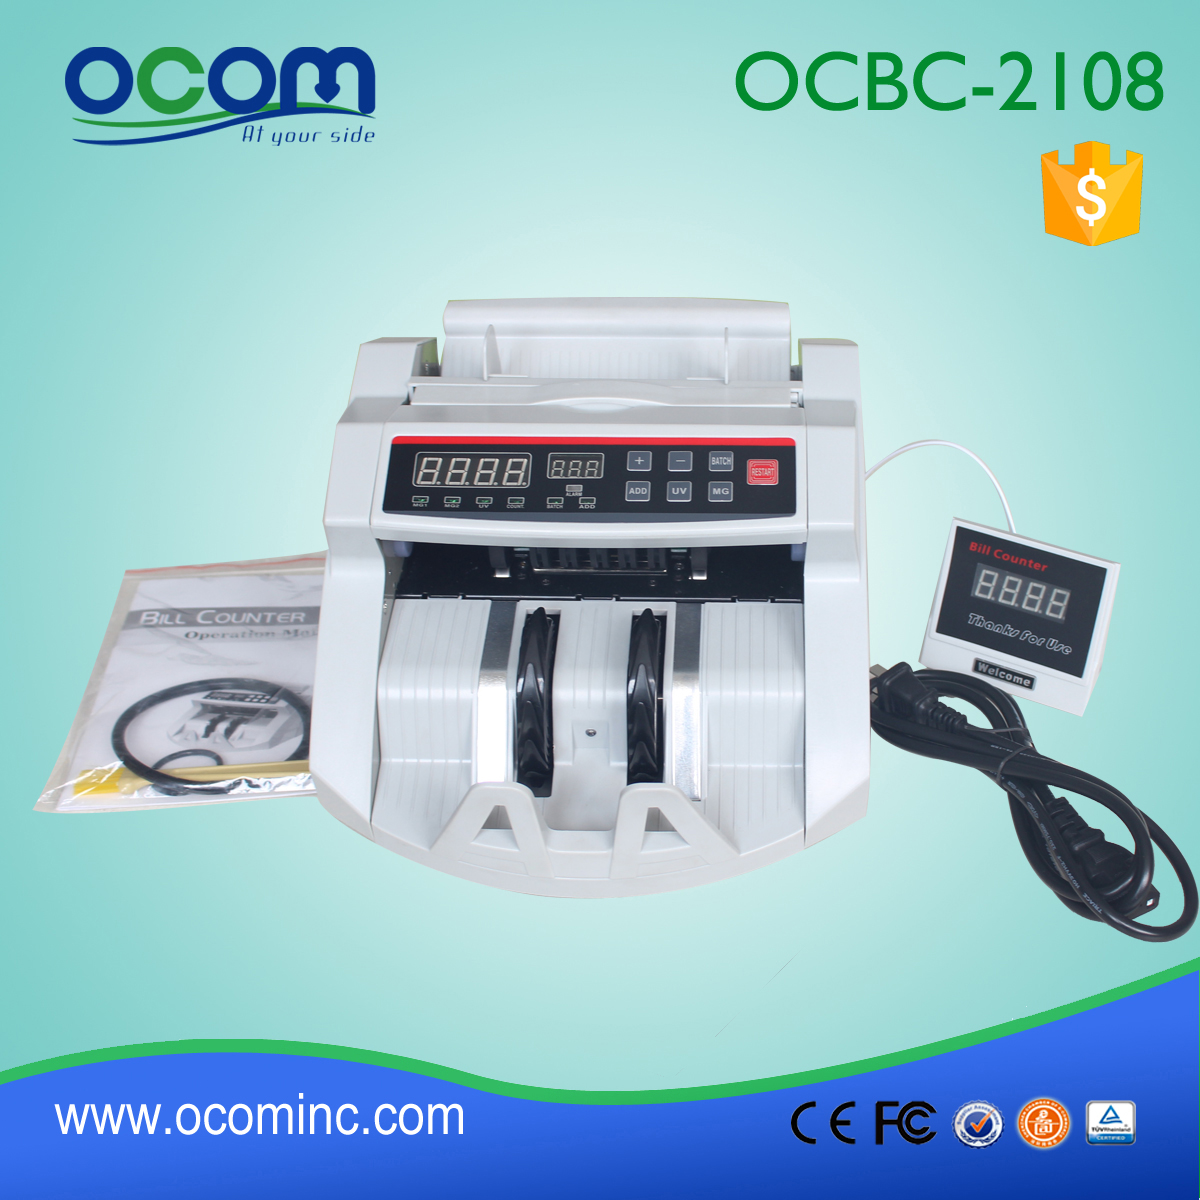 Fast note bill currency counting machine with fake money detector